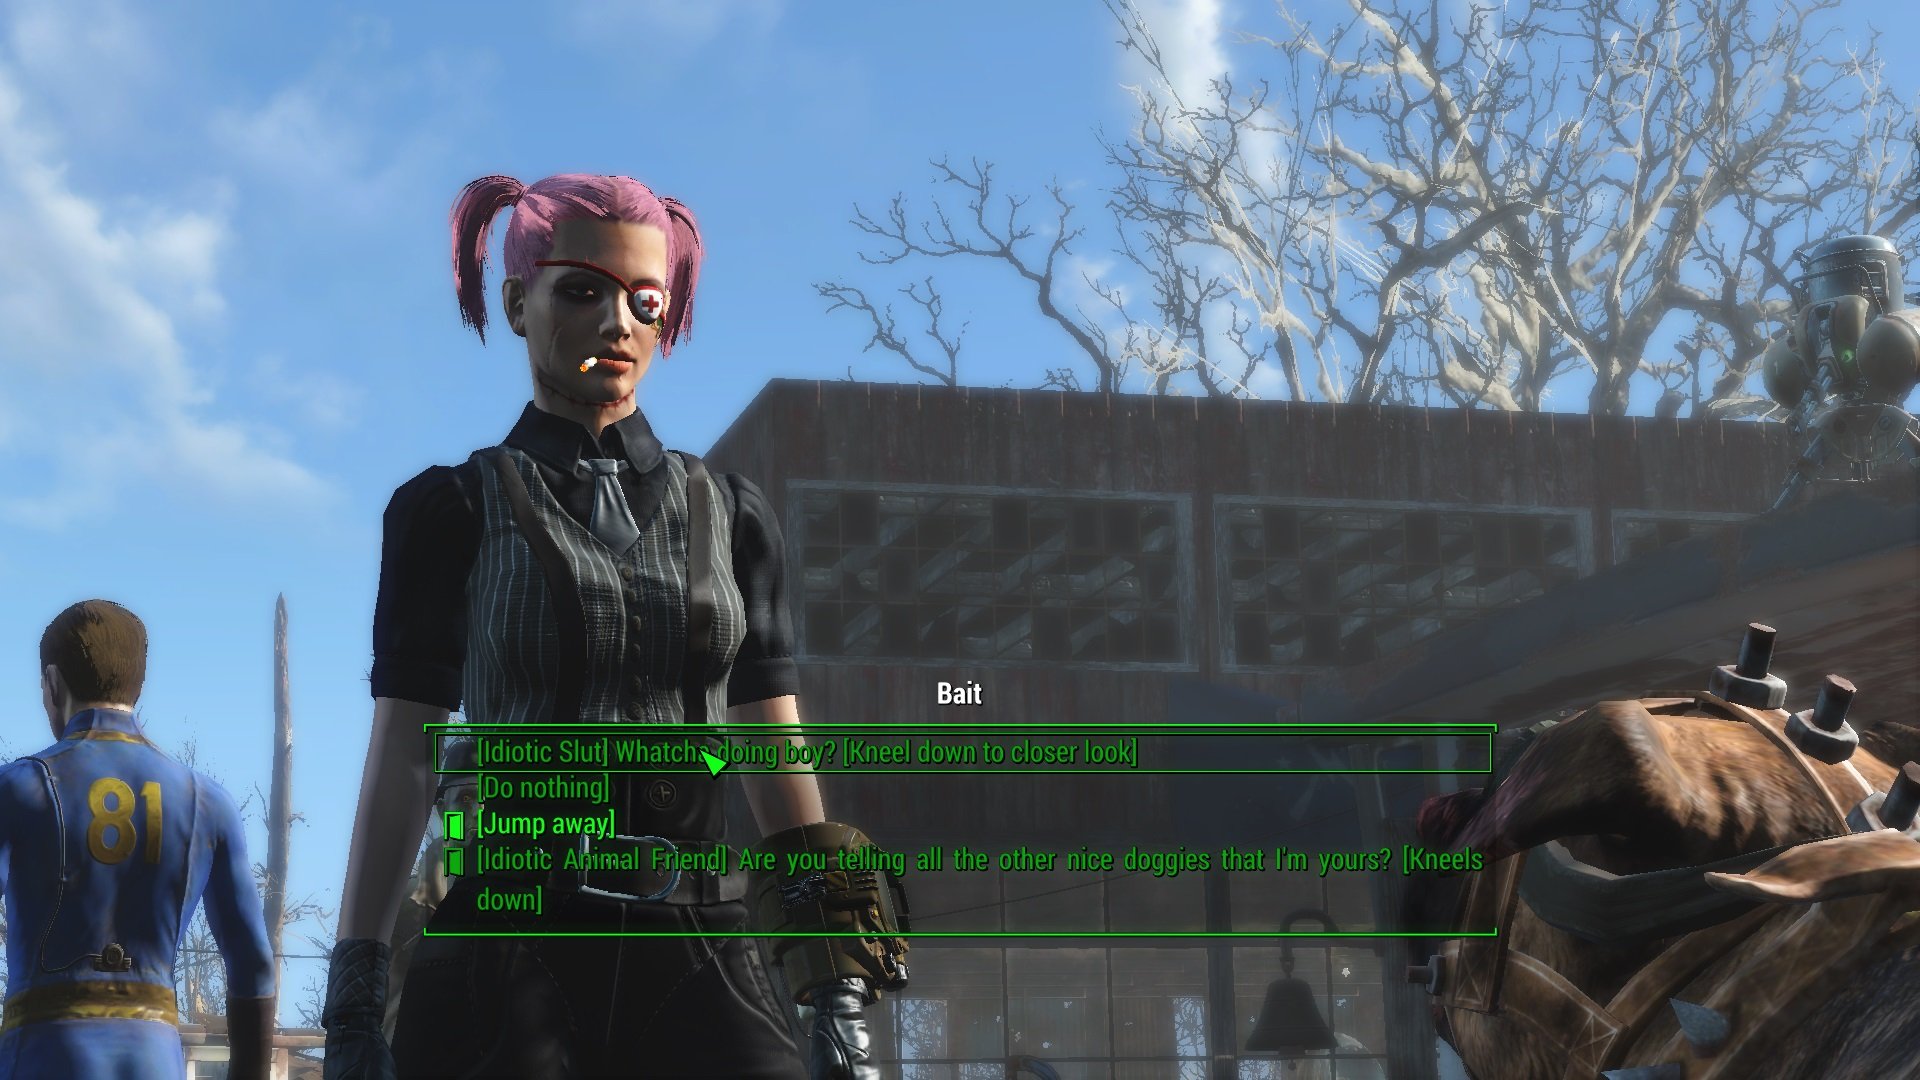 Smutty Fallout Quest: Likely a fallout